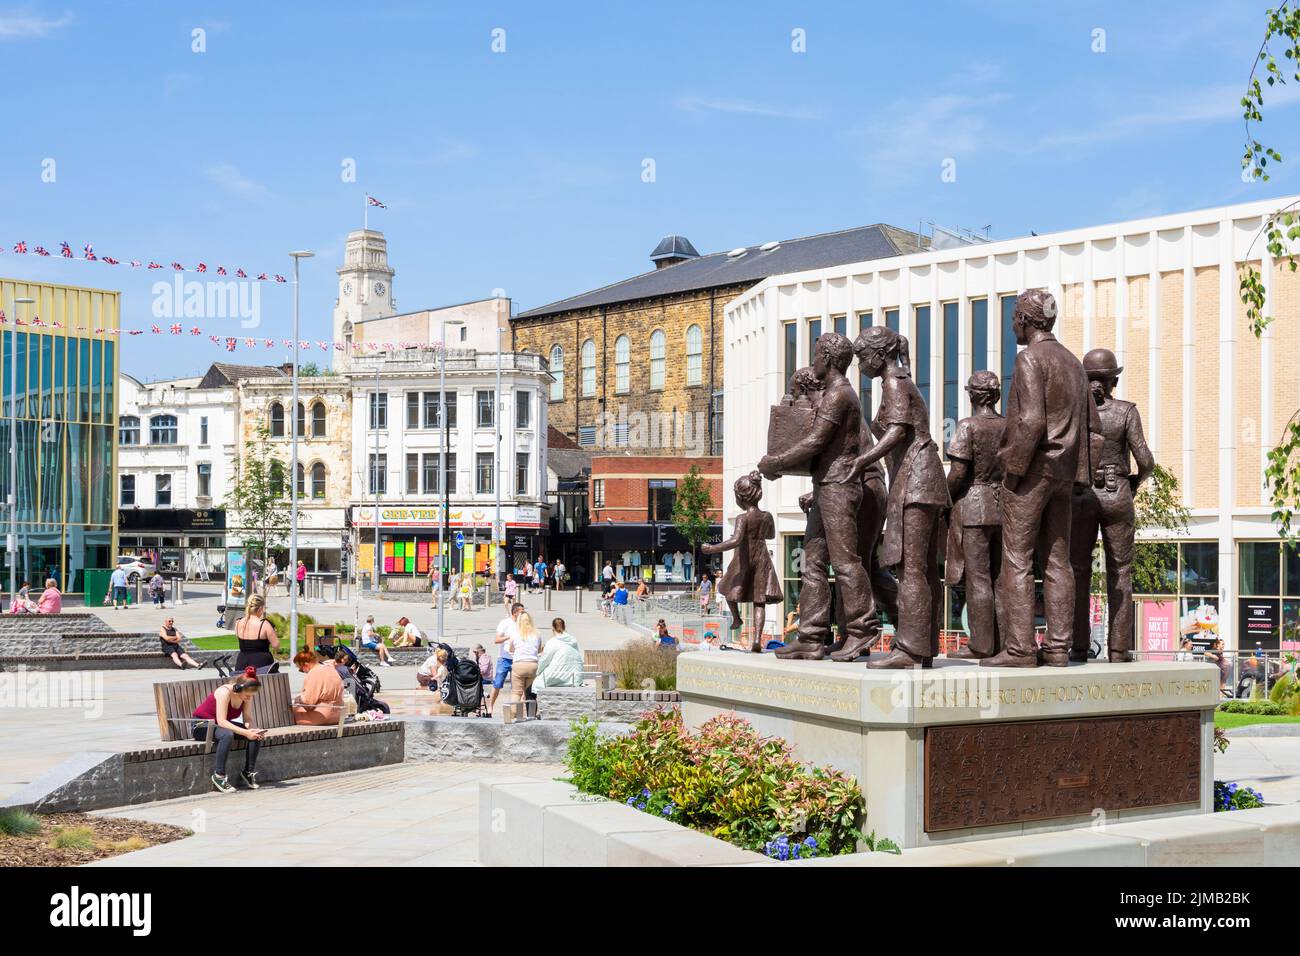 People enjoying the sun in Glass Work's square Barnsley South Yorkshire West Riding of Yorkshire England UK GB Europe Stock Photo